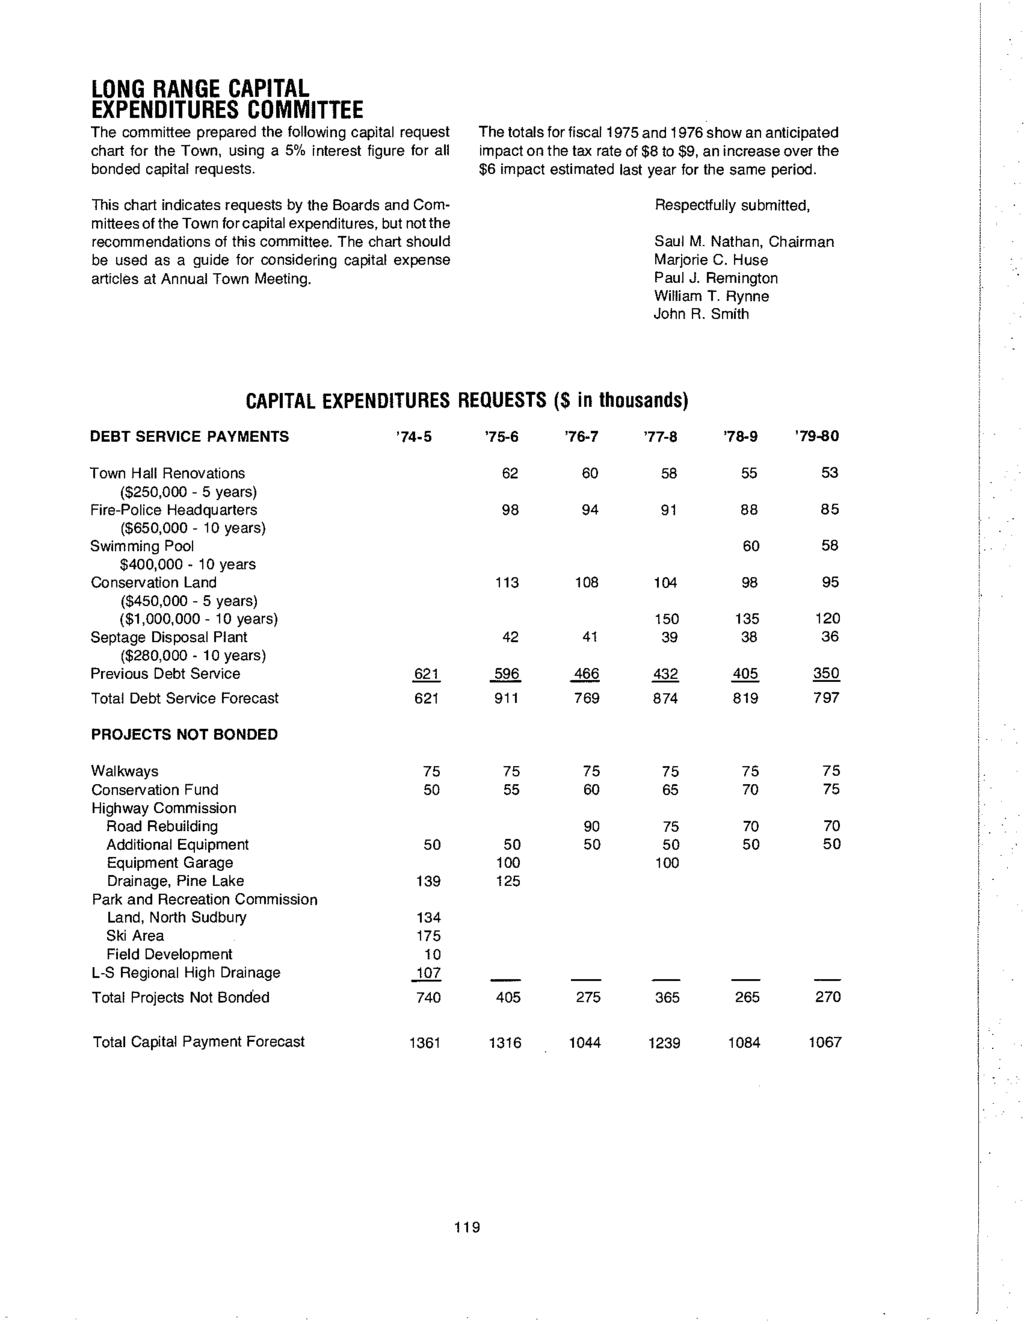 LONG RANGE CAPITAL EXPENDITURES COMMITTEE The committee prepared the following capital request chart for the Town, using a 5% interest figure for all bonded capital requests.